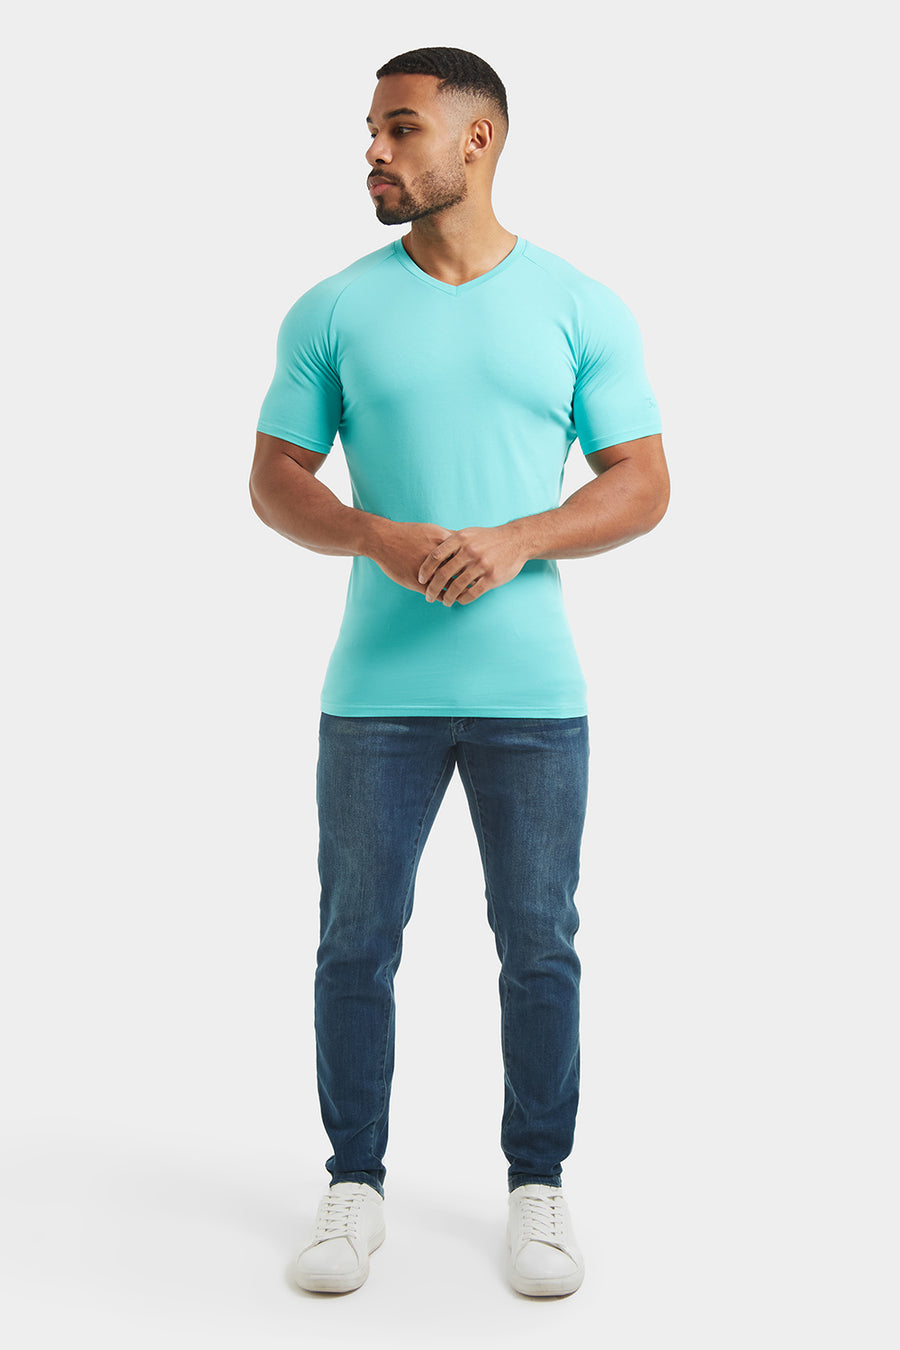 Athletic Fit V-Neck in Spearmint - TAILORED ATHLETE - USA